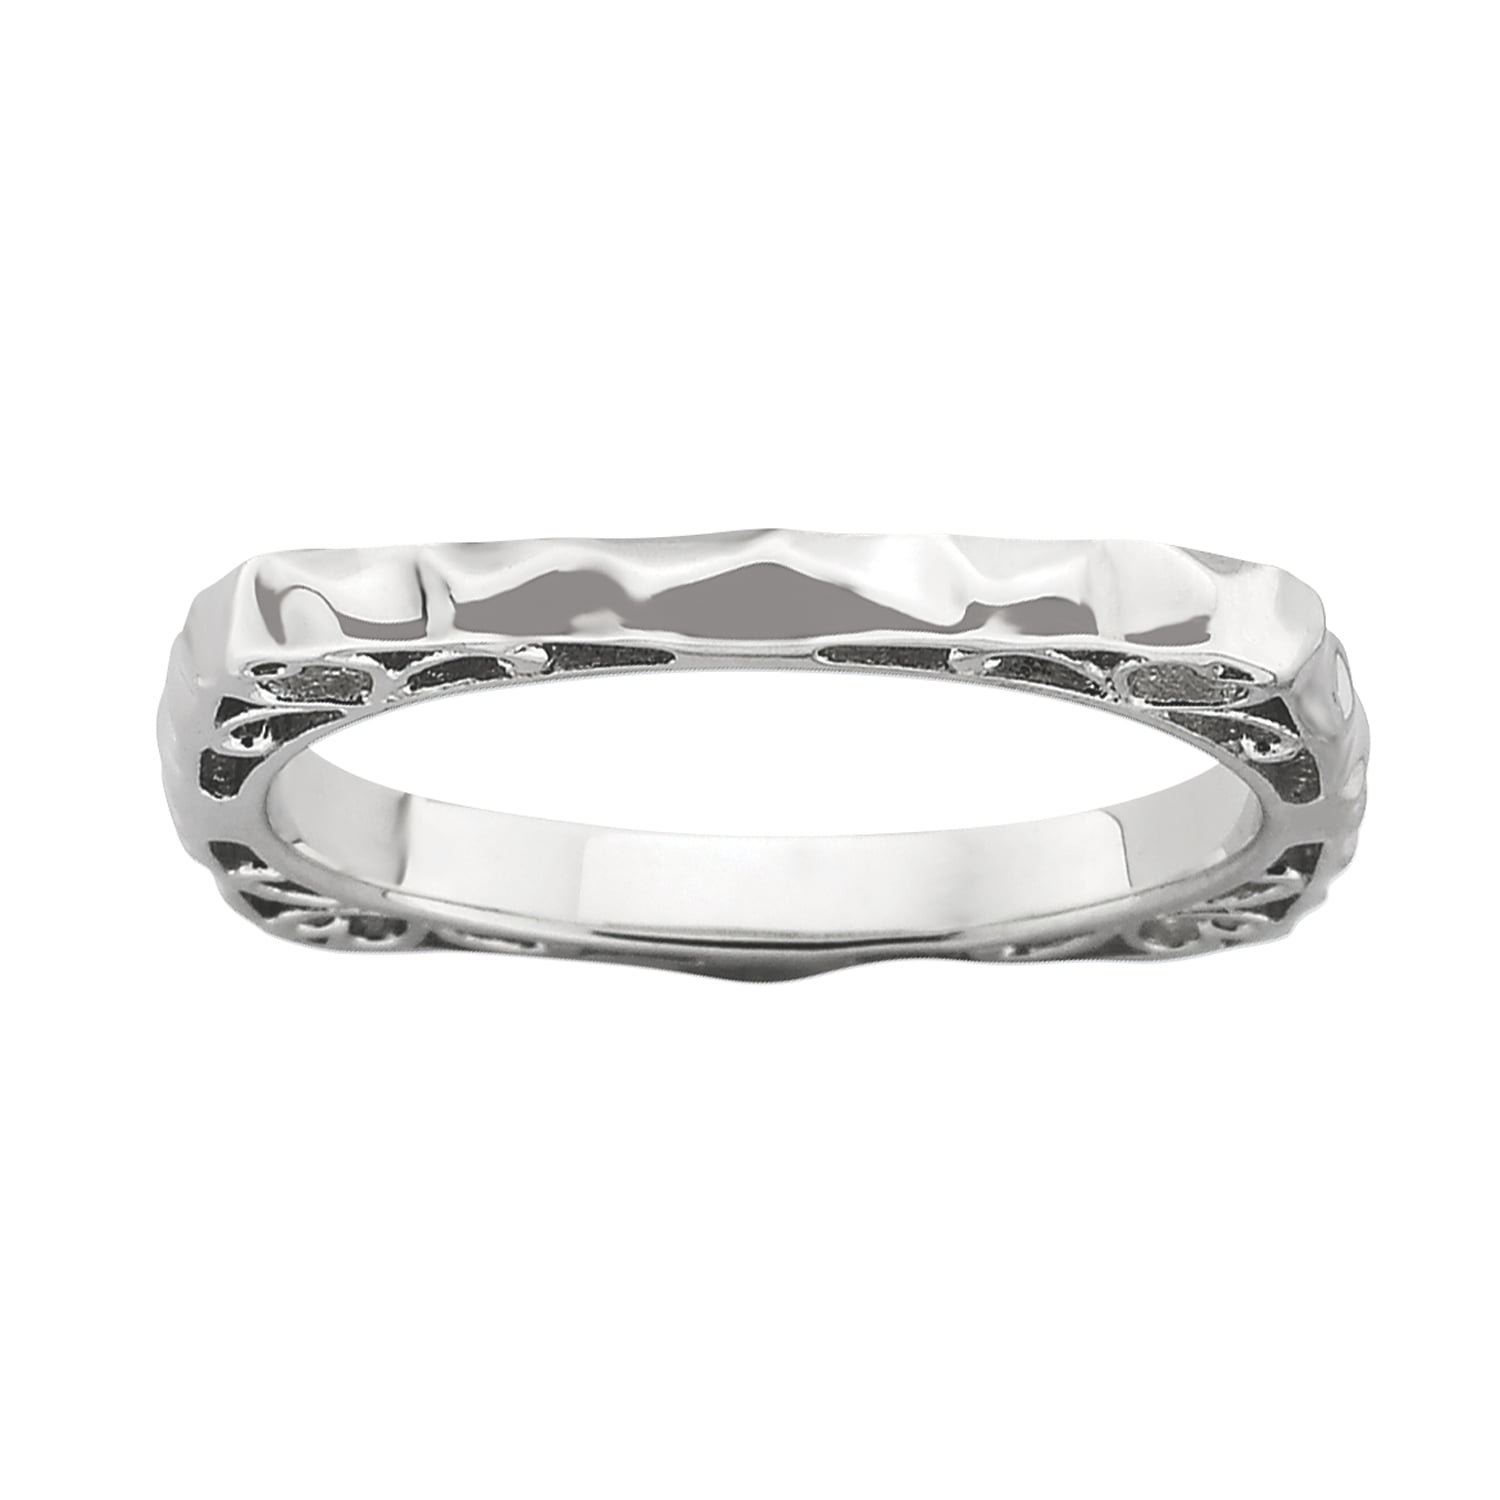 Best Quality Free Gift Box Sterling Silver Polished Rhodium-plate Square Ring by Stackable Expressions